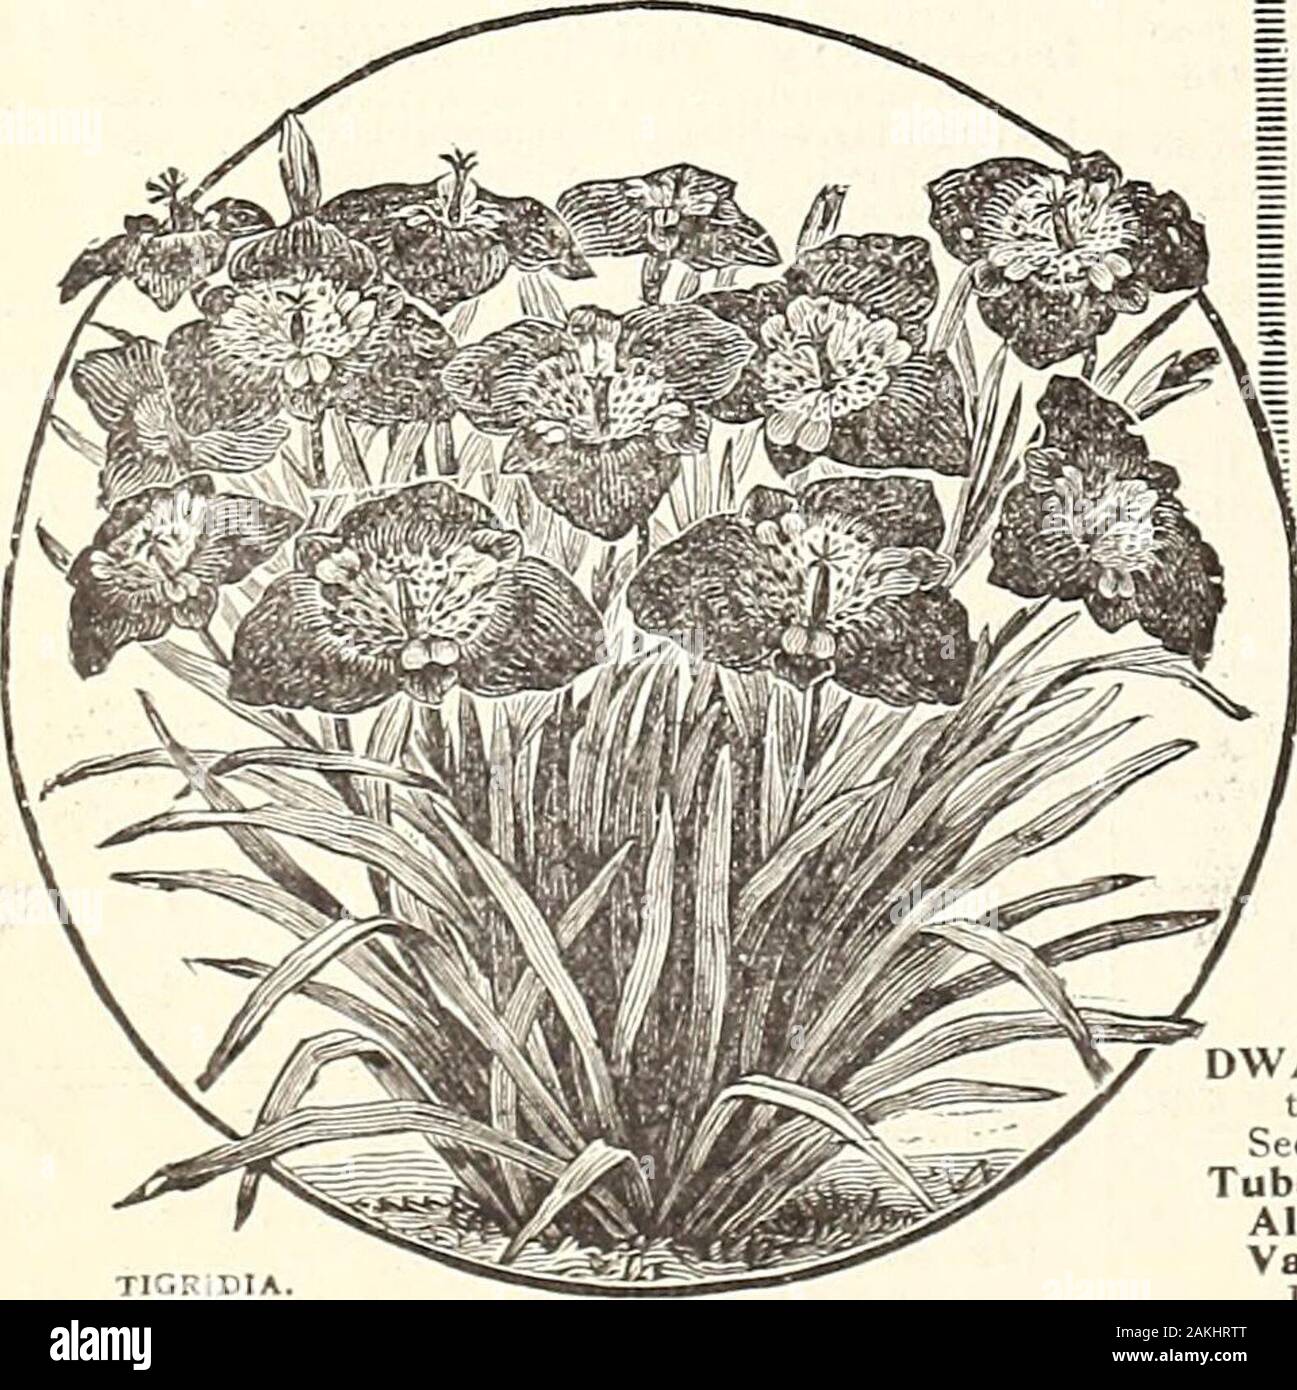 Peter Henderson & Co.'s spring 1899 florists' and market gardeners' wholesale catalogue of plants, flower seeds, bulbs, vegetable seeds, farm seeds, fertilizers, insecticides, toolsetc . white bell-shaped flowers Madeira Vine. Climbing Mignonette Montbretia Crocosmi.i-flora Spikes of star-shaped orange red flowers Miila Biflora. Flowers, star-shaped, 2 in. across, clear waxy white Oxalis Lasiandra Rosy pink Deippi. Rosy white Pancratium Calathinum. Clusters of large fragrant, pearly white flowers Tigridia. Conchlflora. Dark yellow, ied spots.Pavonia Grandiflora. Crimson, centre mot-tled yellow Stock Photo